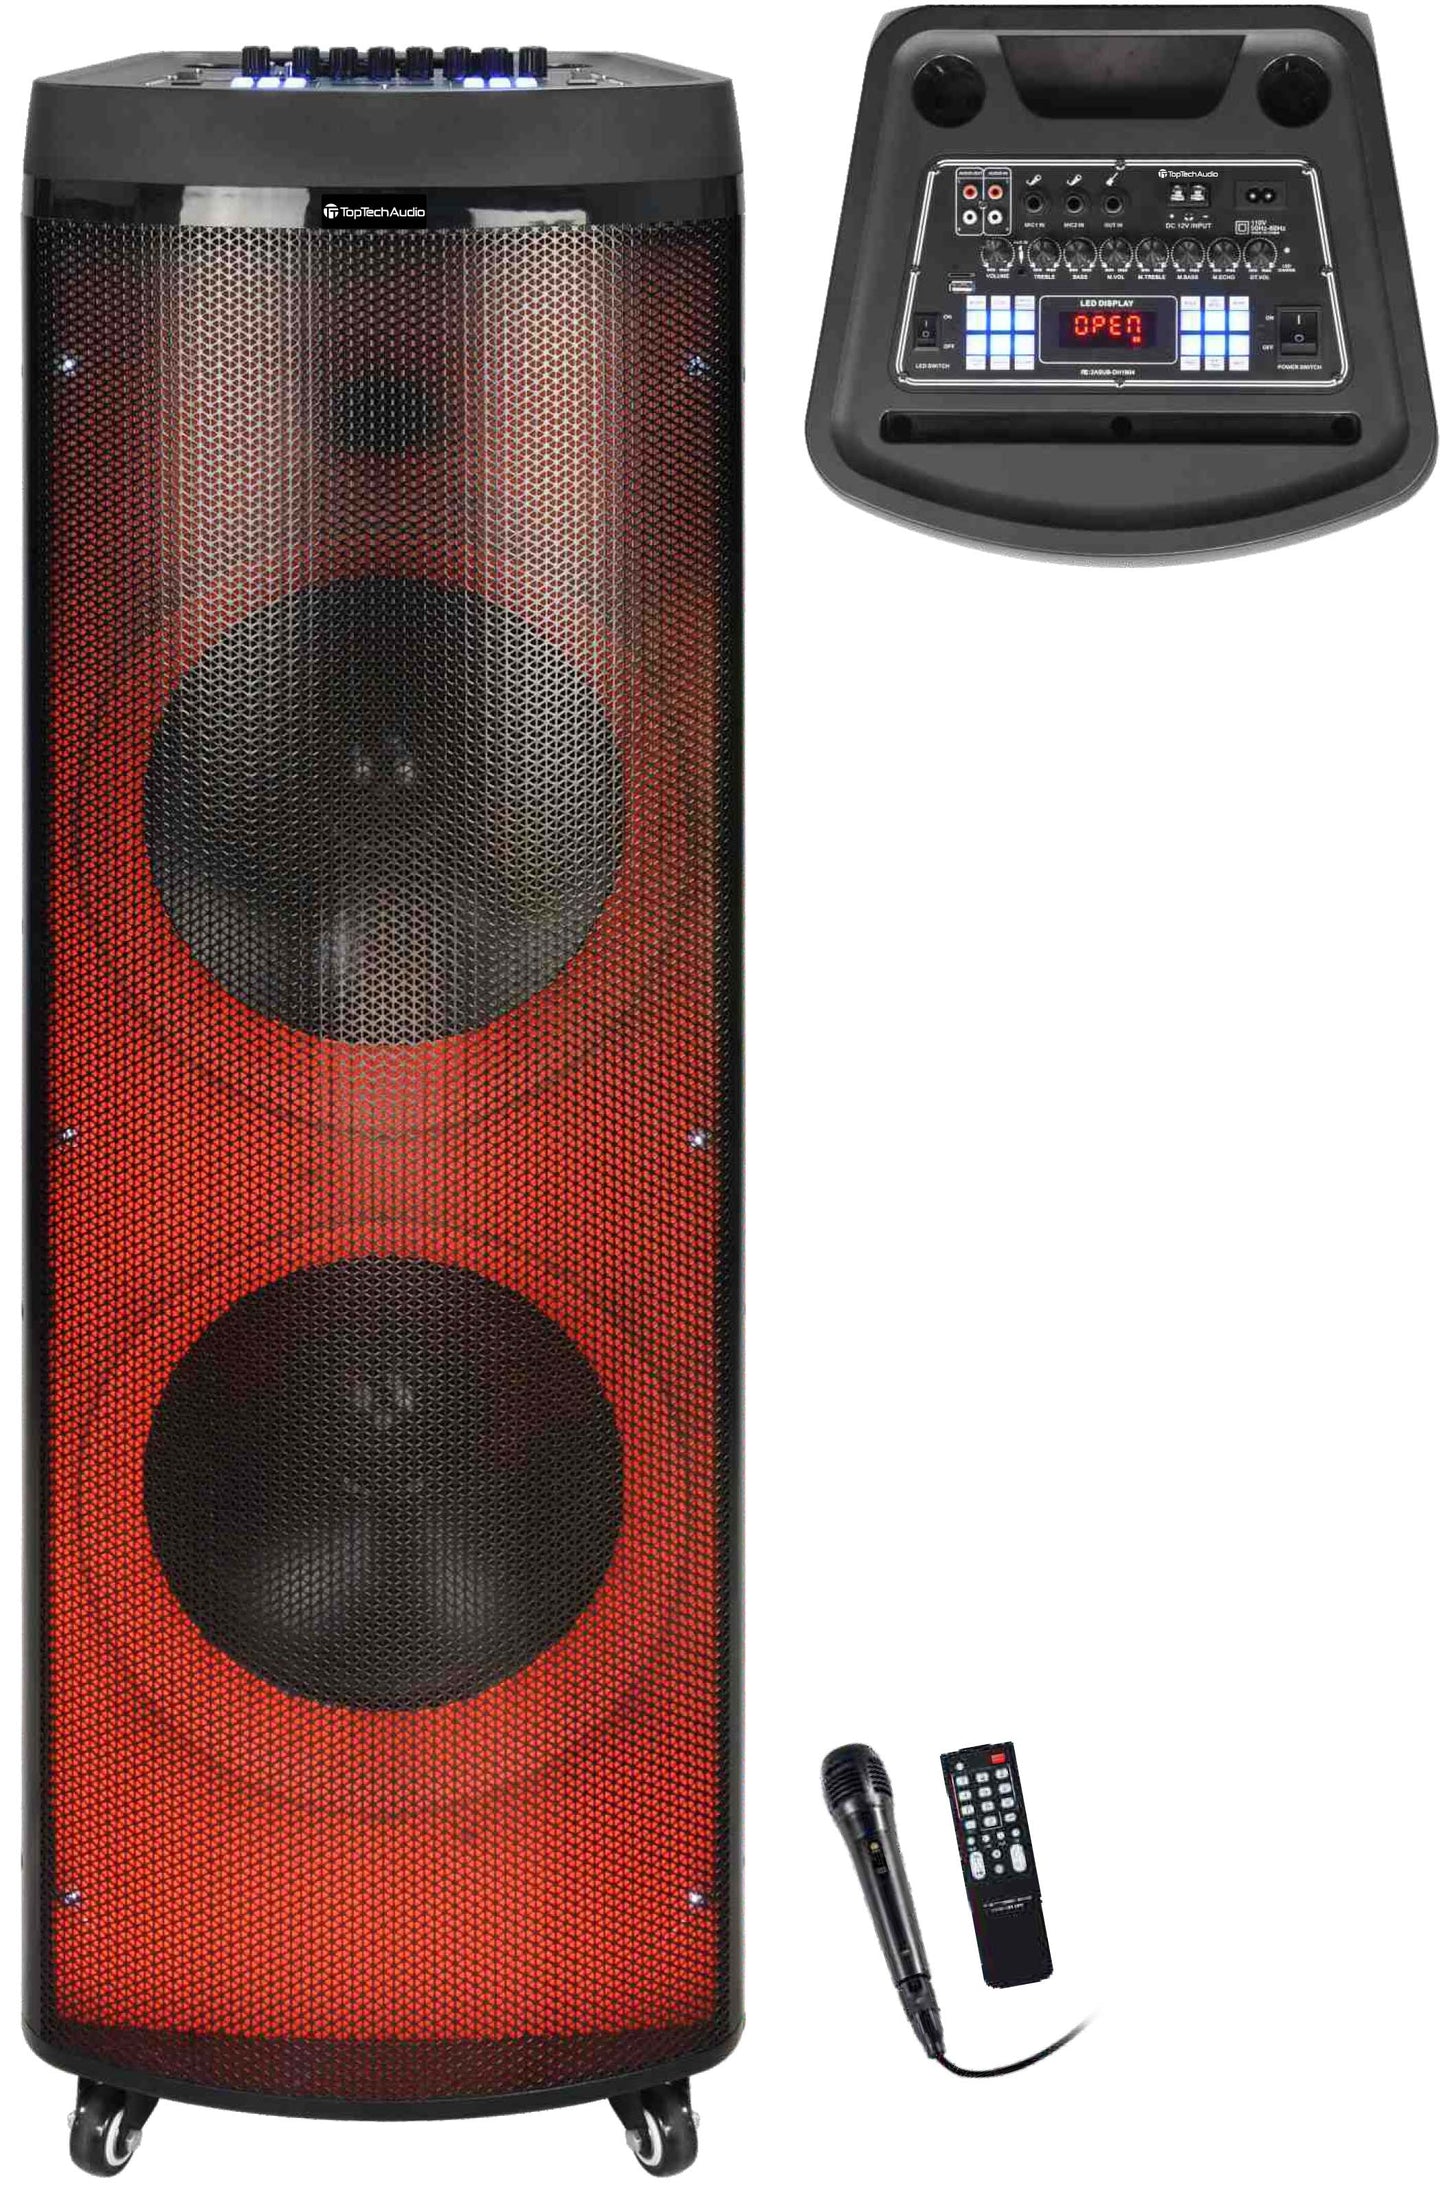 Fully Amplified Portable 12000 Watts Peak Power 2x12” Speaker with led light